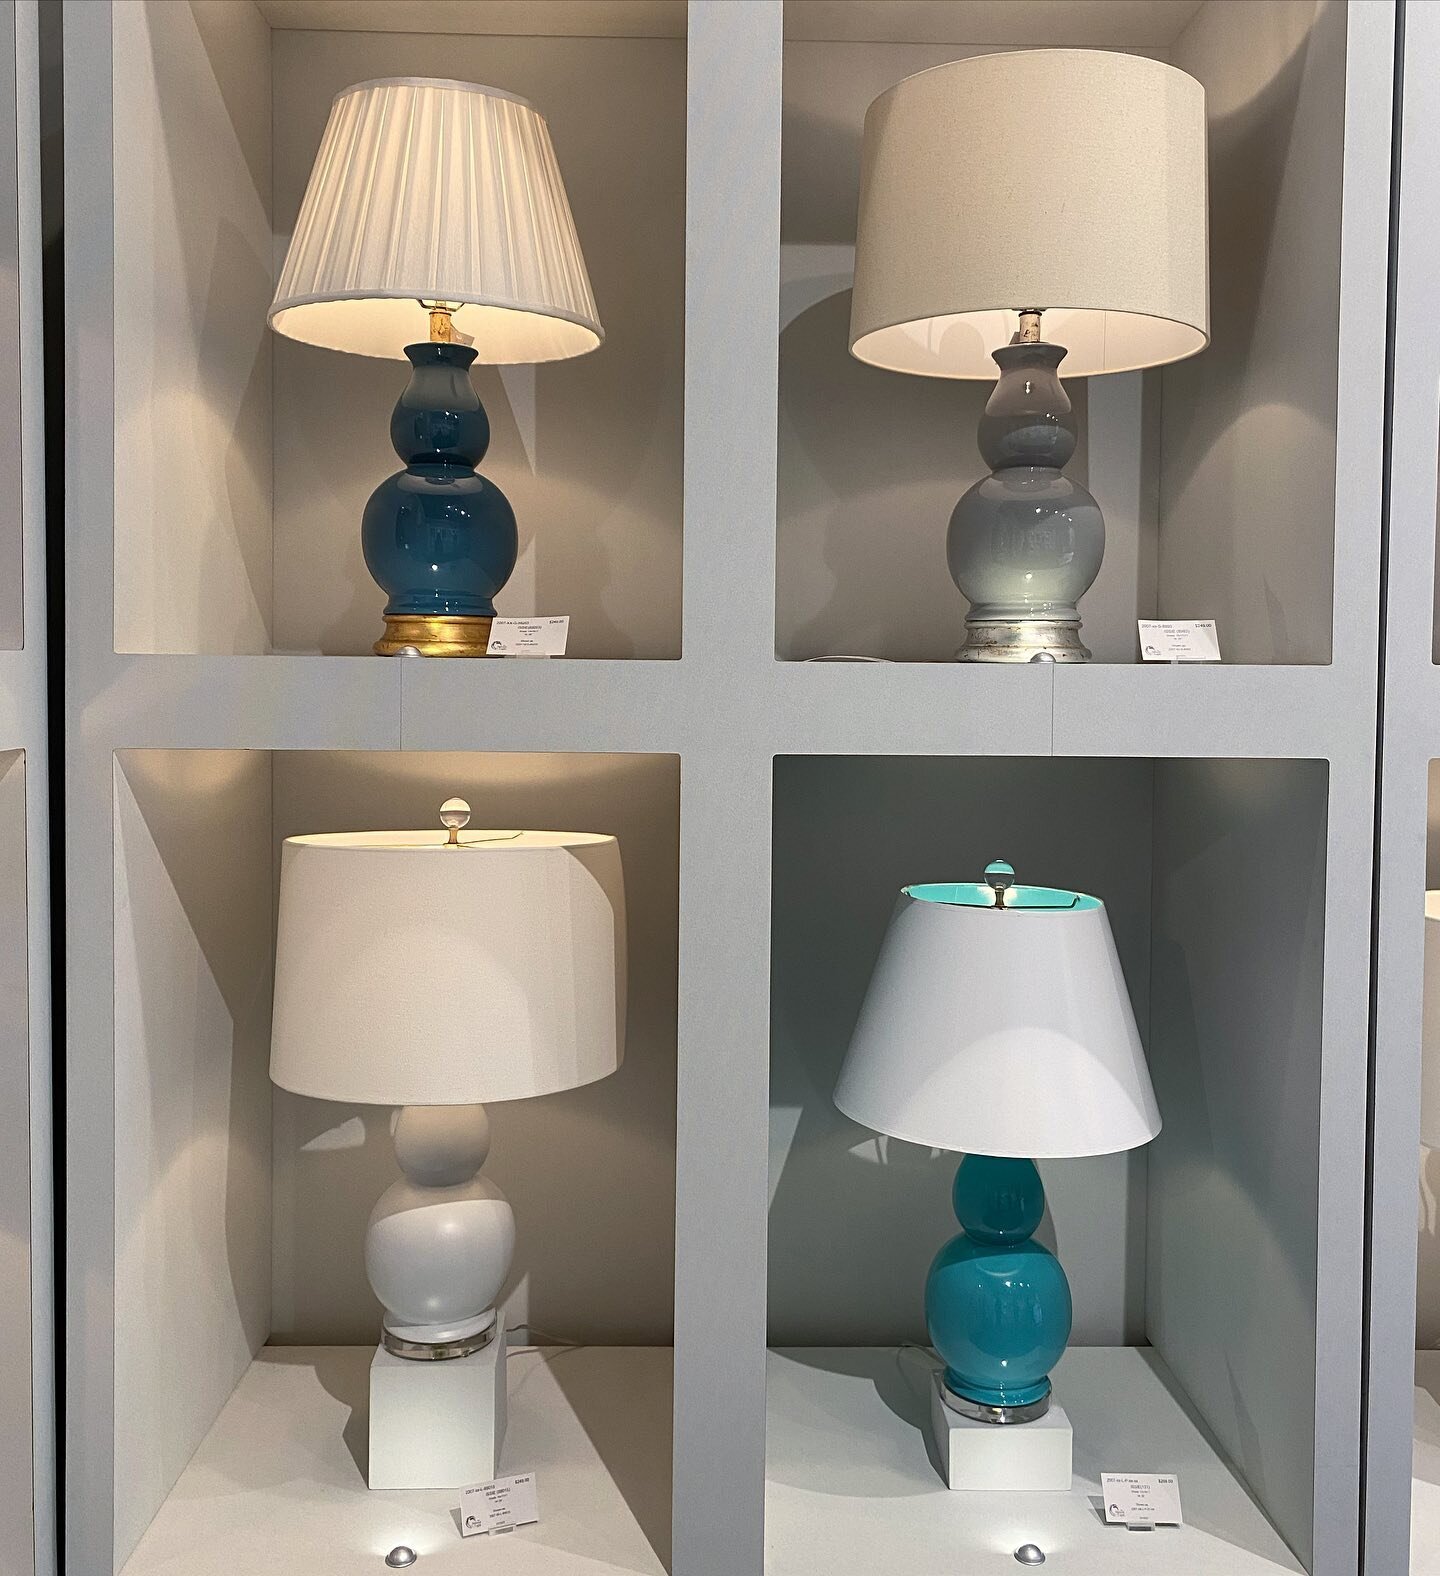 Some fun lamps from @the_naturallight from @highpointmarket! Was such a bright and fun showroom✨

#thenaturallight #naturallight #naturallighting #naturallights #highpointmarket #highpointfurnituremarket #hpmkt2022 #interiordesigngoals